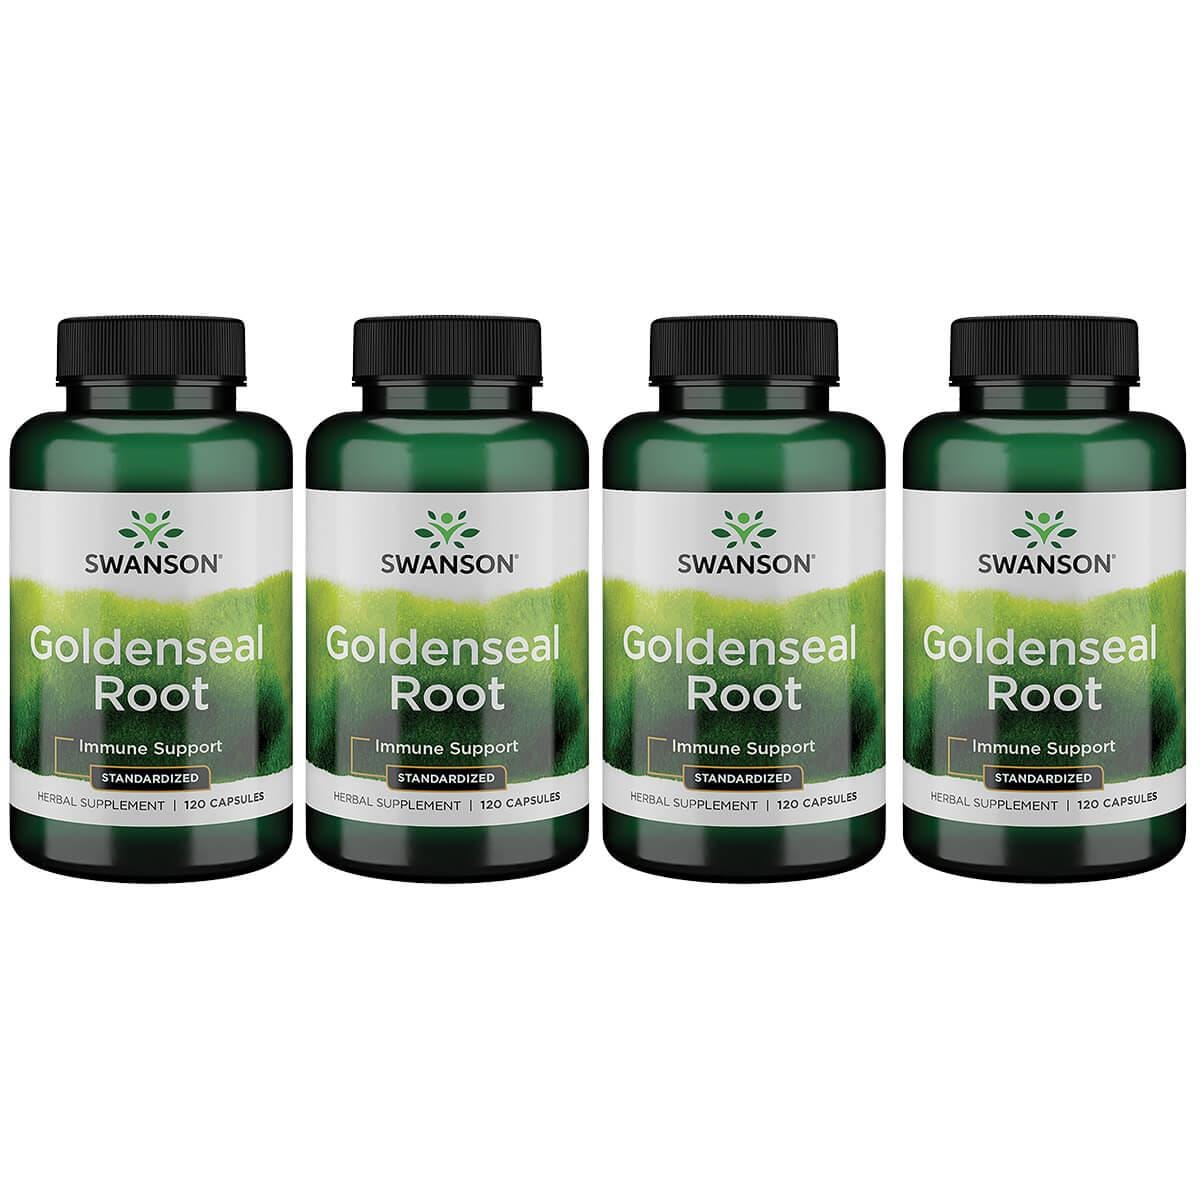 Swanson Superior Herbs Goldenseal Root - Standardized 4 Pack Vitamin 120 Caps Herbs and Supplements